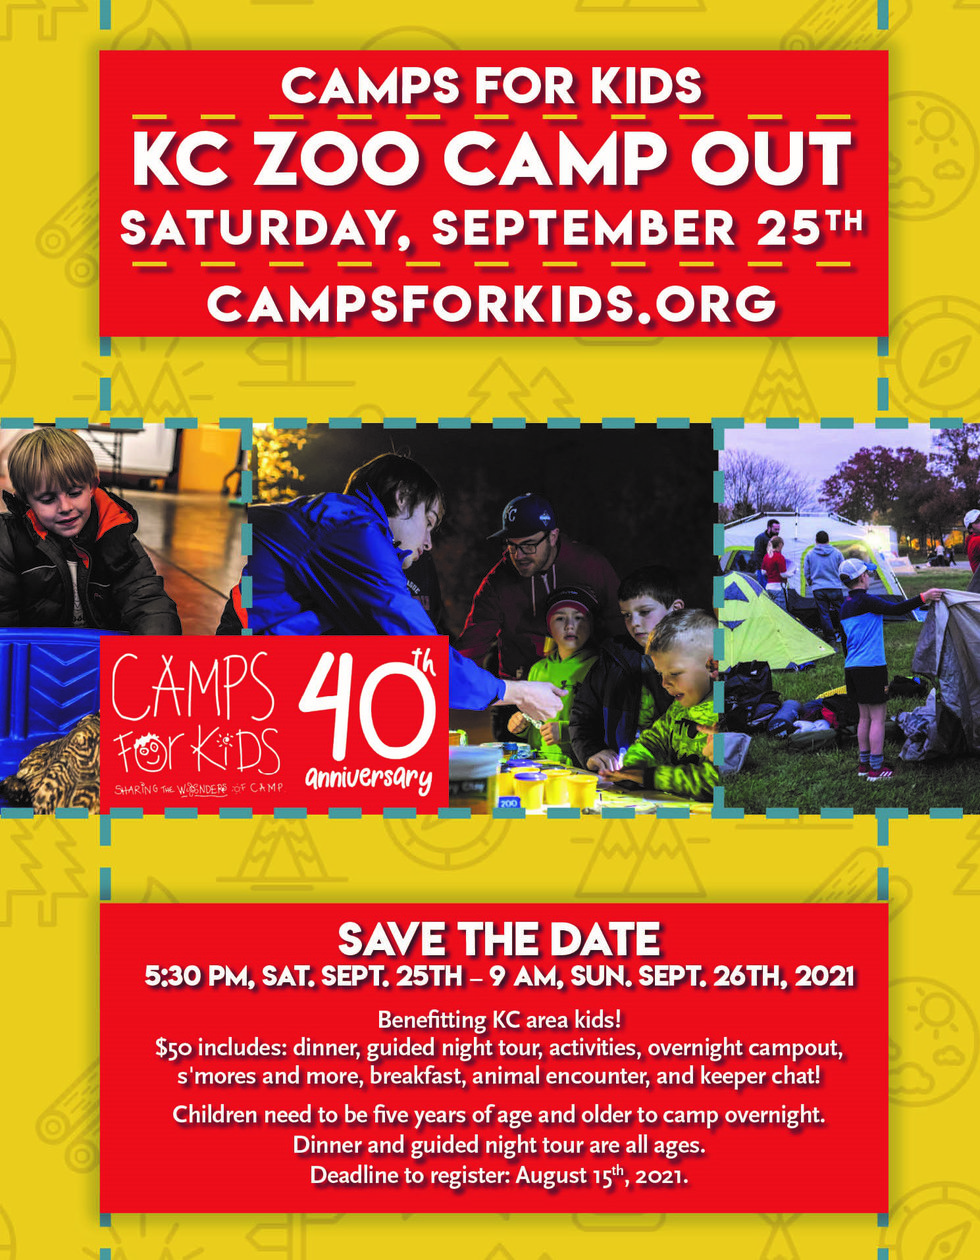 009-1136 Camps for Kids 2021 Camp Out - Save the Date3[6].jpg